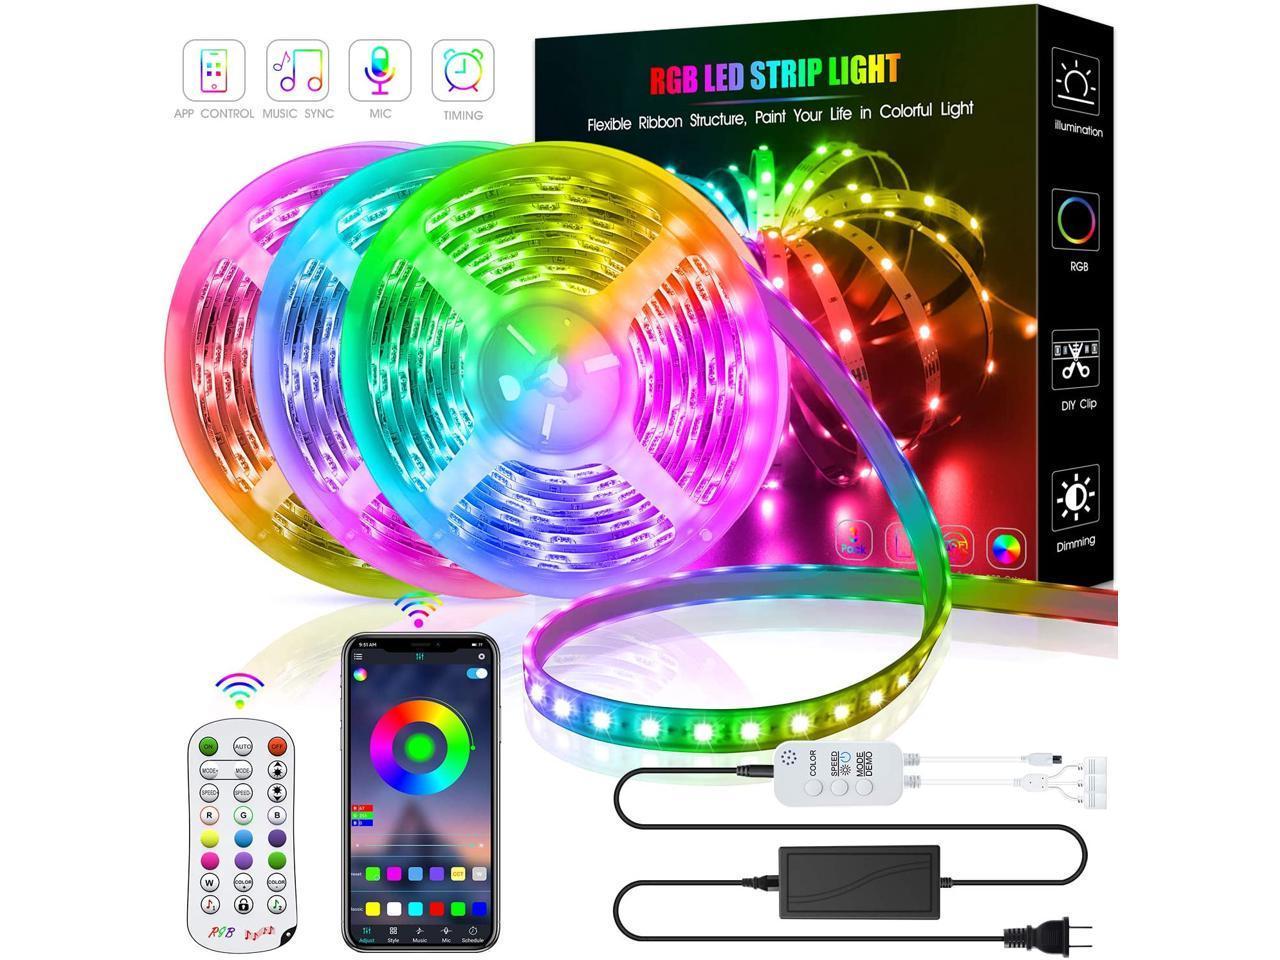 Karrong App Control Strips Light 10 m Led Strip Lights with Remote 5050 RGB Color Changing Rope Light Easy to Install for TV,Bedroom Kitchen,Wedding,Party DIY Decoration